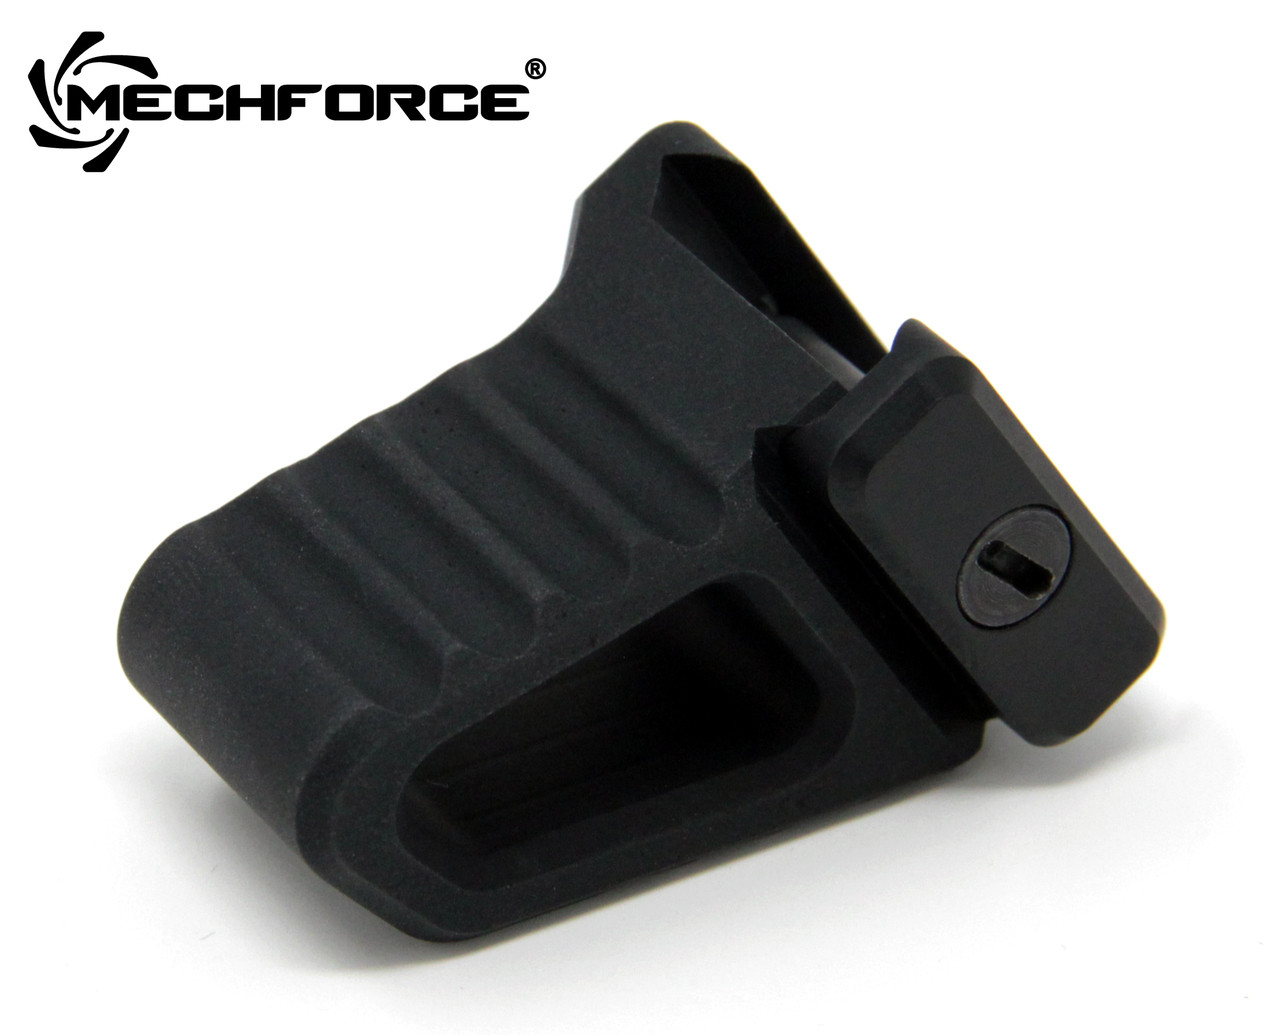 Mechforce Tactical Style Aluminum Hand Stop / Foregrip for